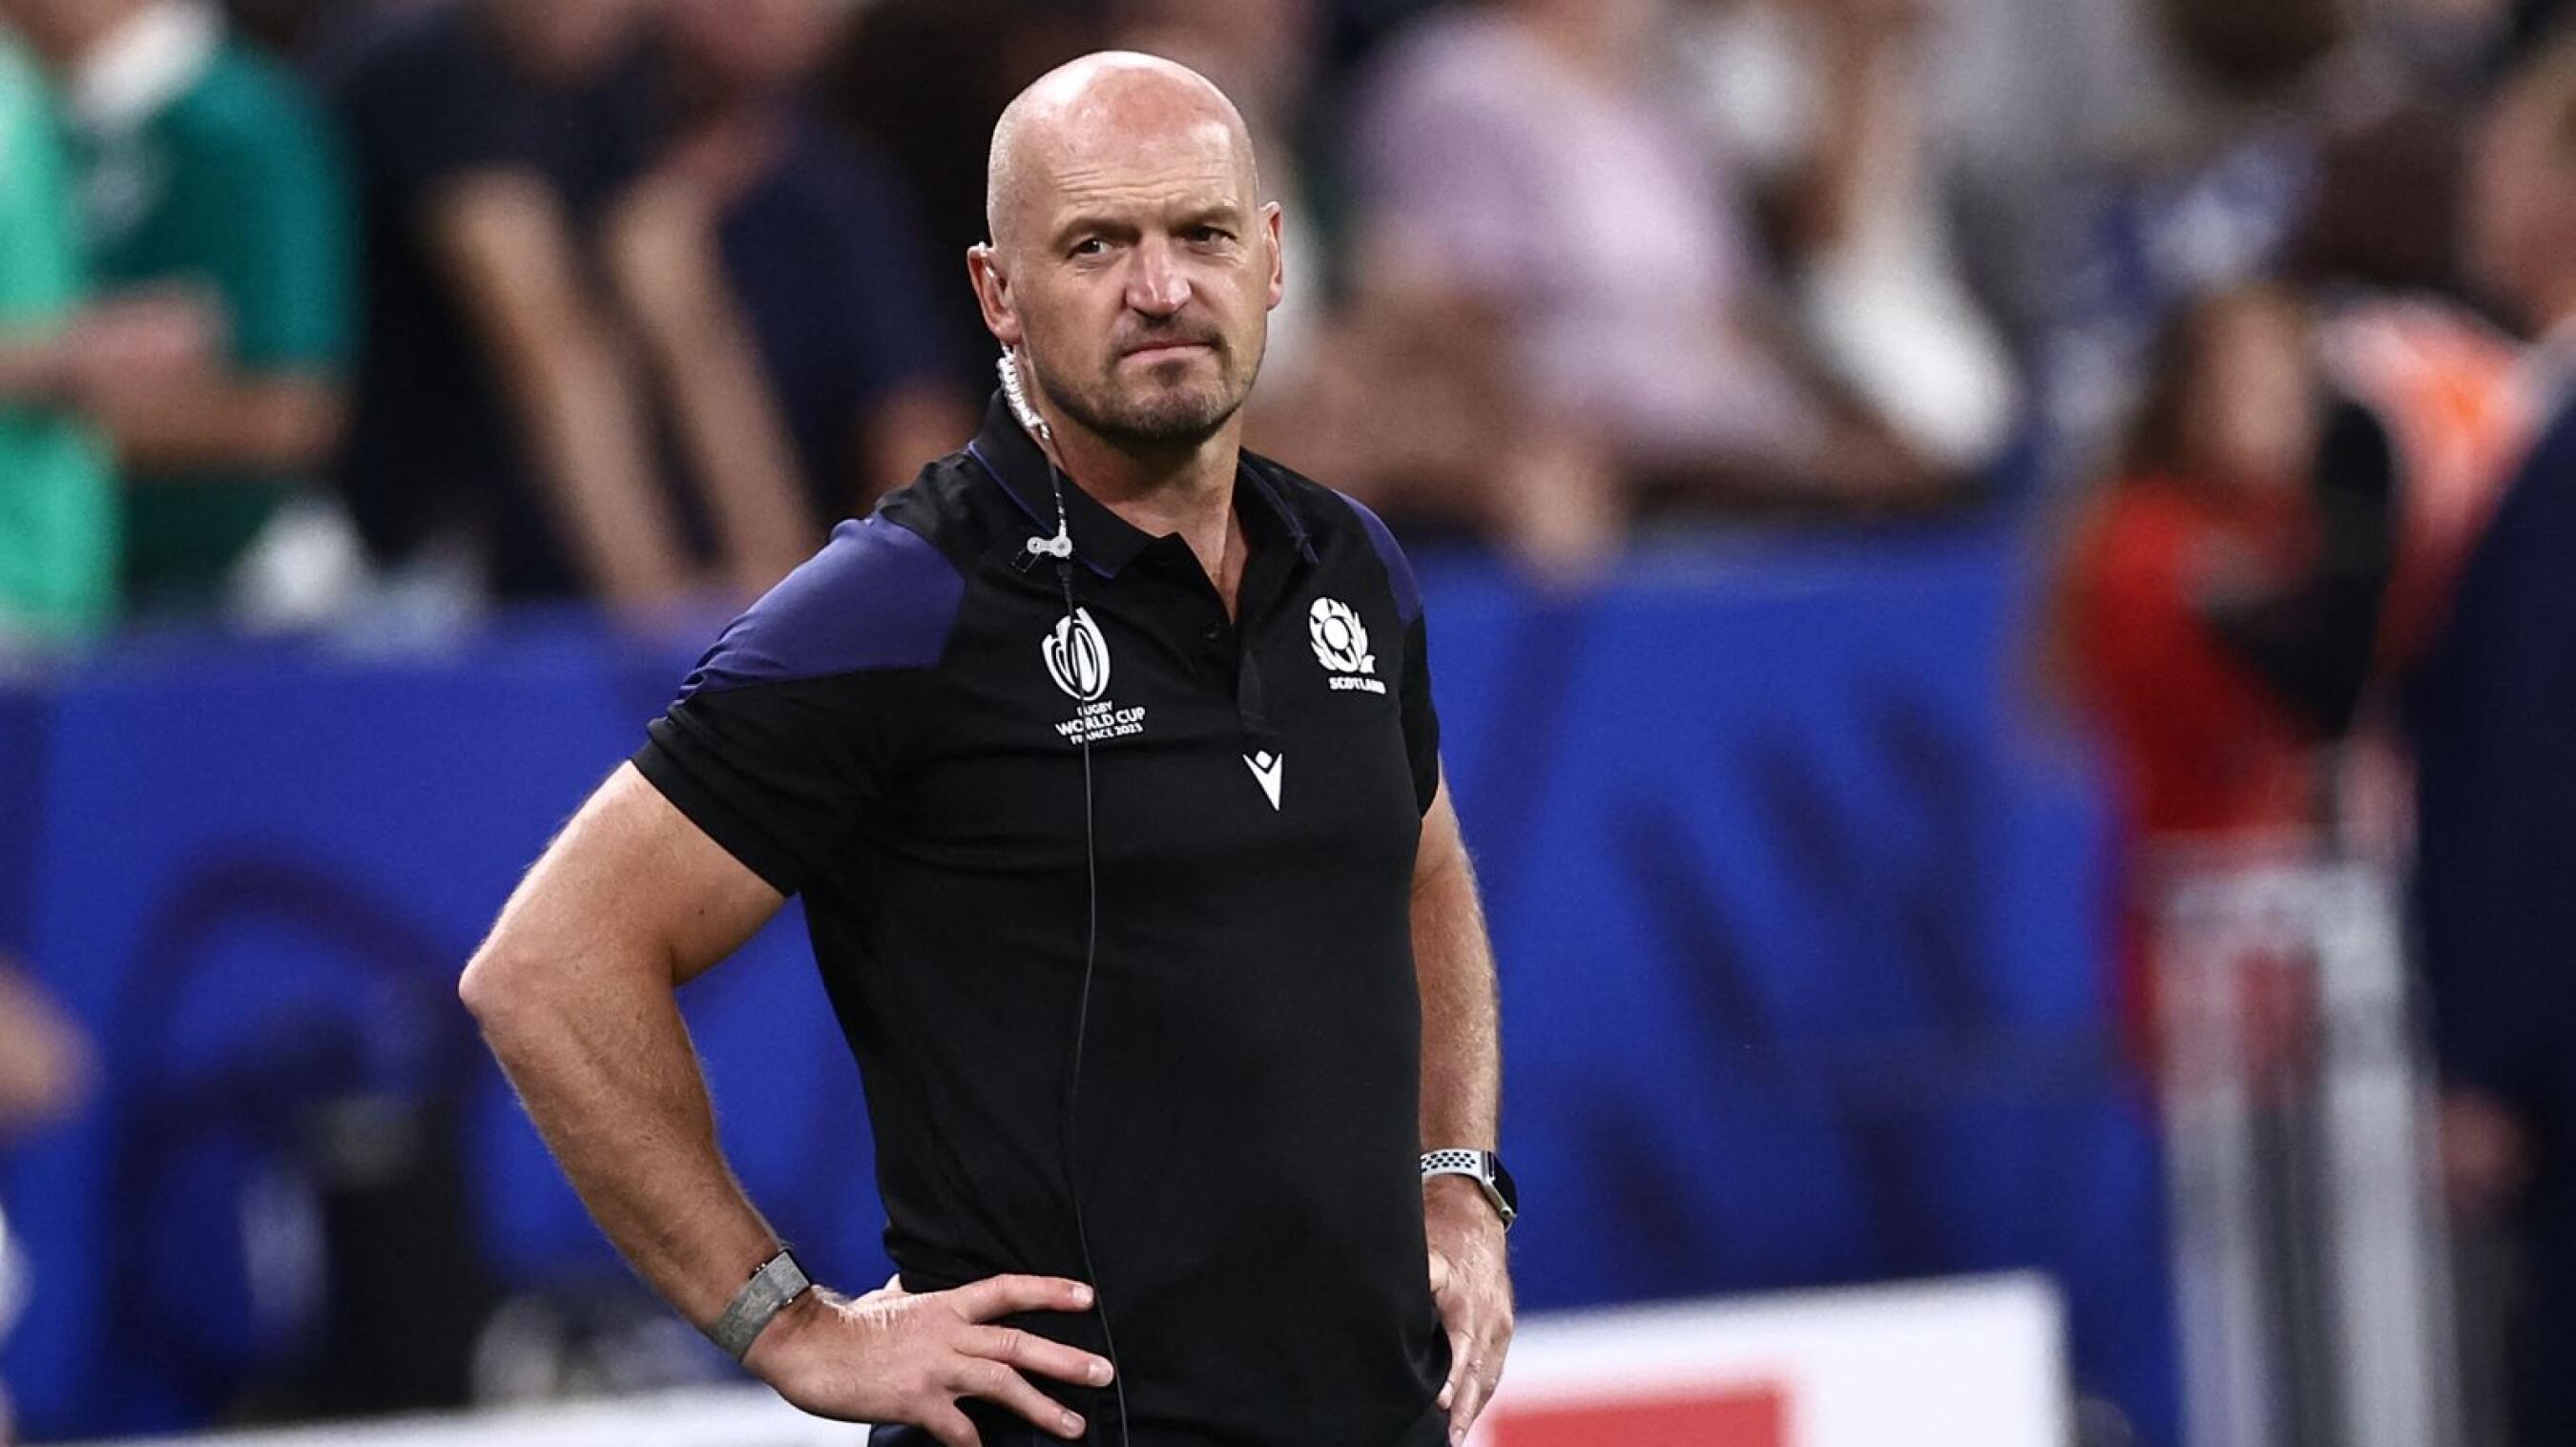 Scotland's head coach Gregor Townsend looks on ahead of the France 2023 Rugby World Cup Pool B match between Ireland and Scotland at the Stade de France in Saint-Denis, on the outskirts of Paris